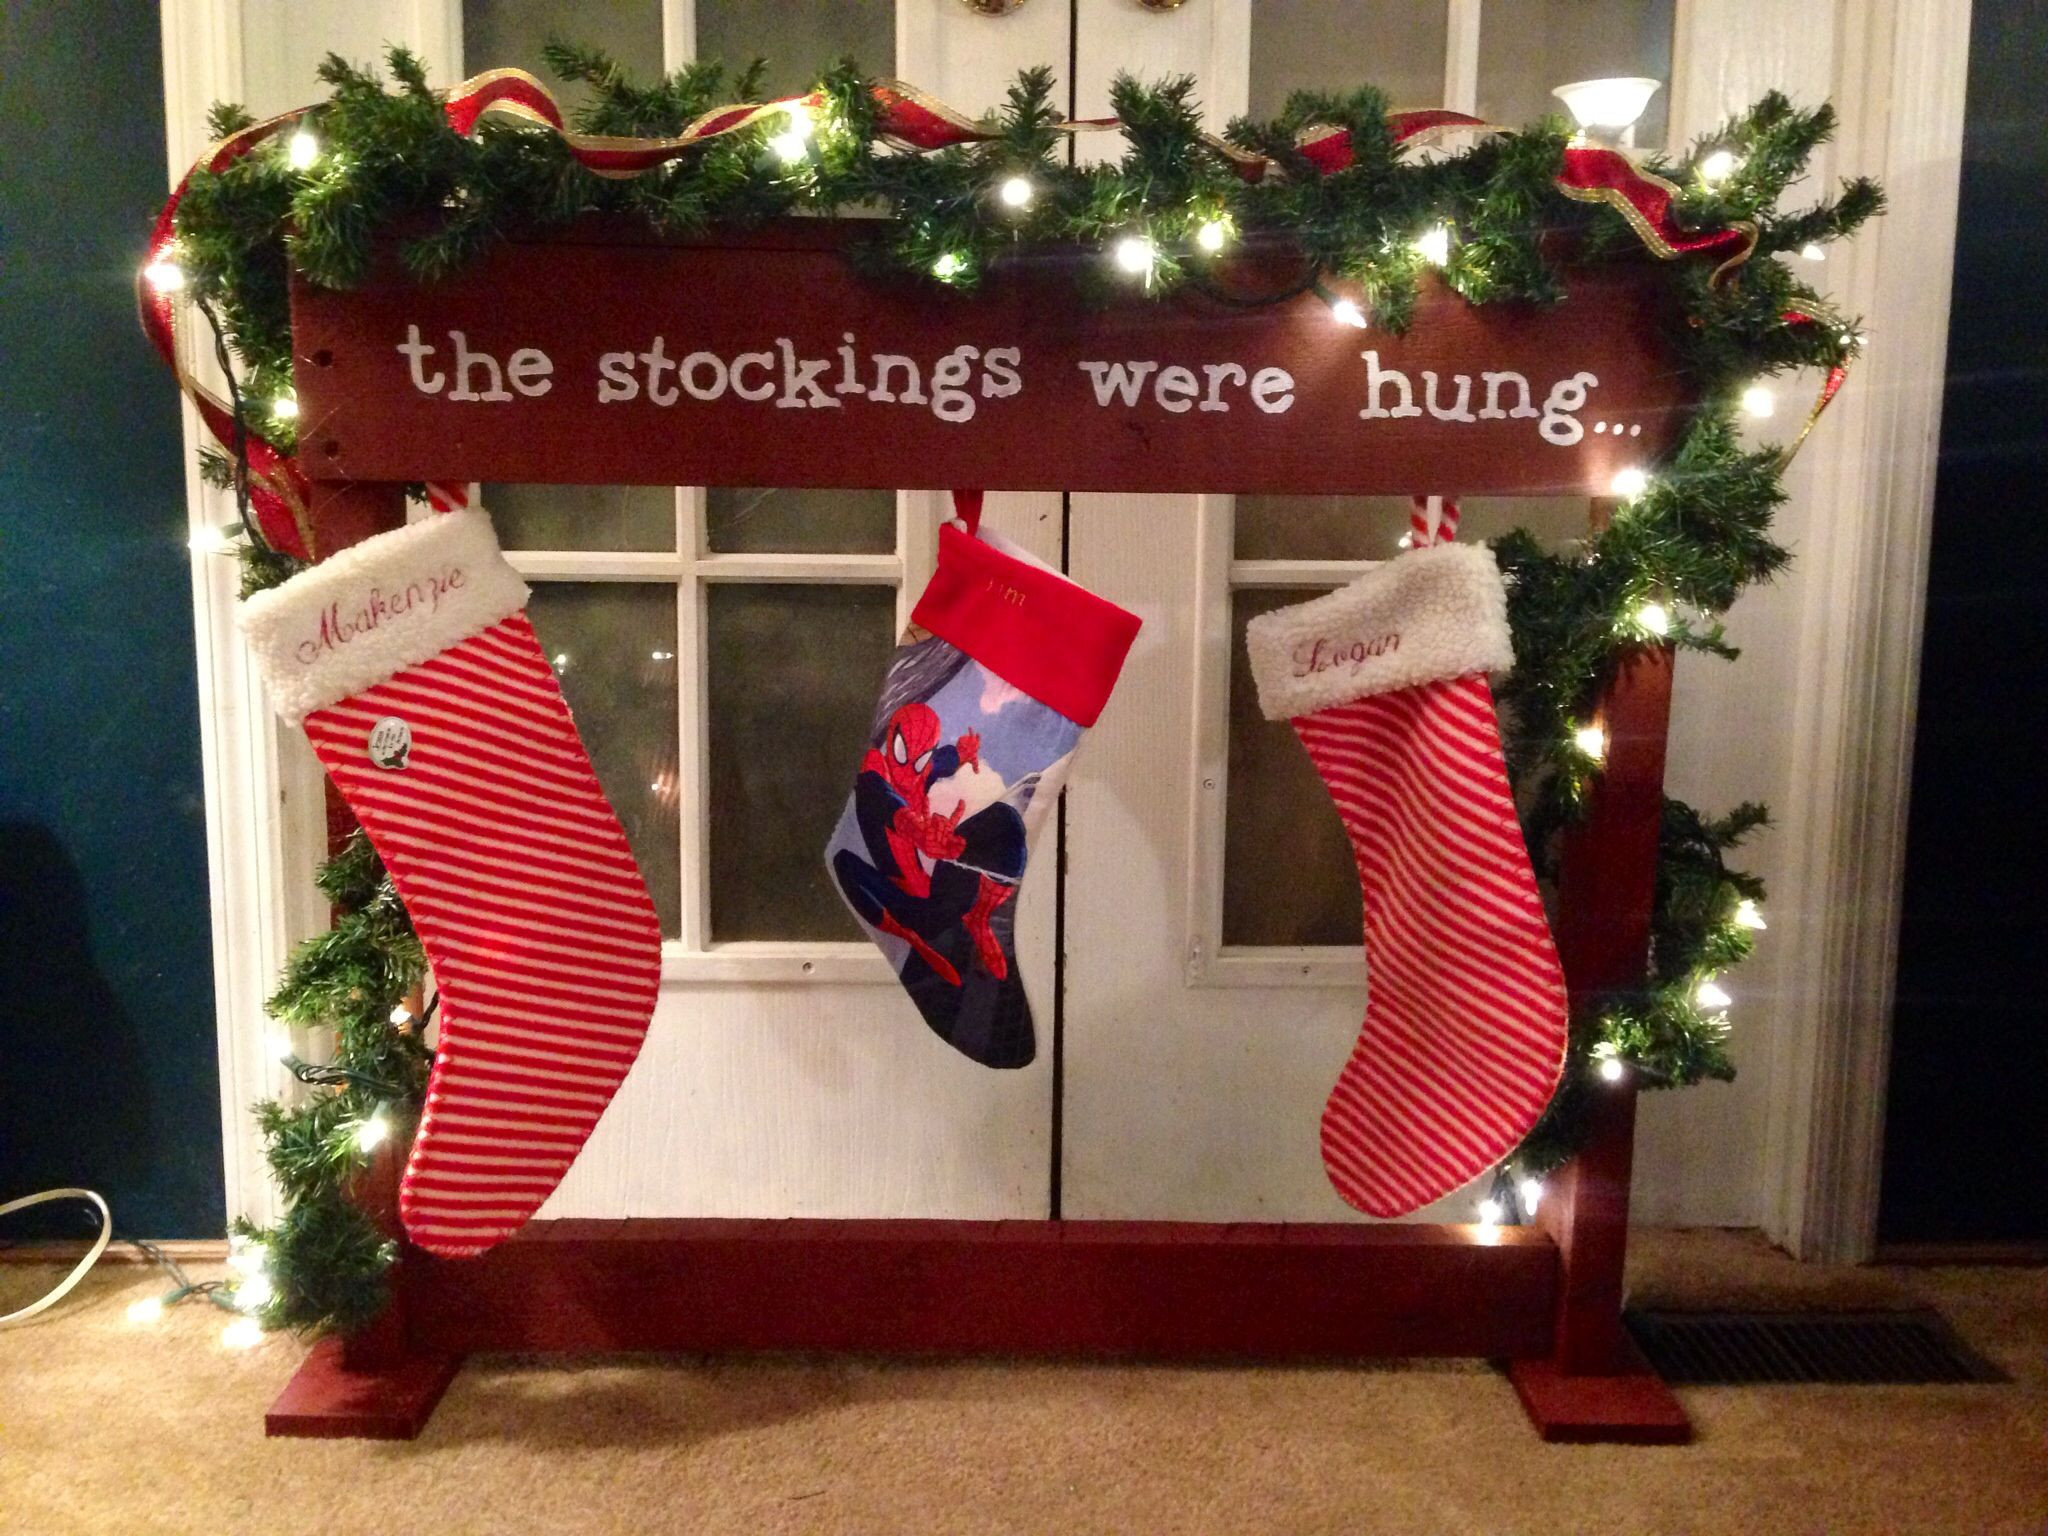 Christmas Stocking Floor Stand
 Stocking holder made from pallet wood